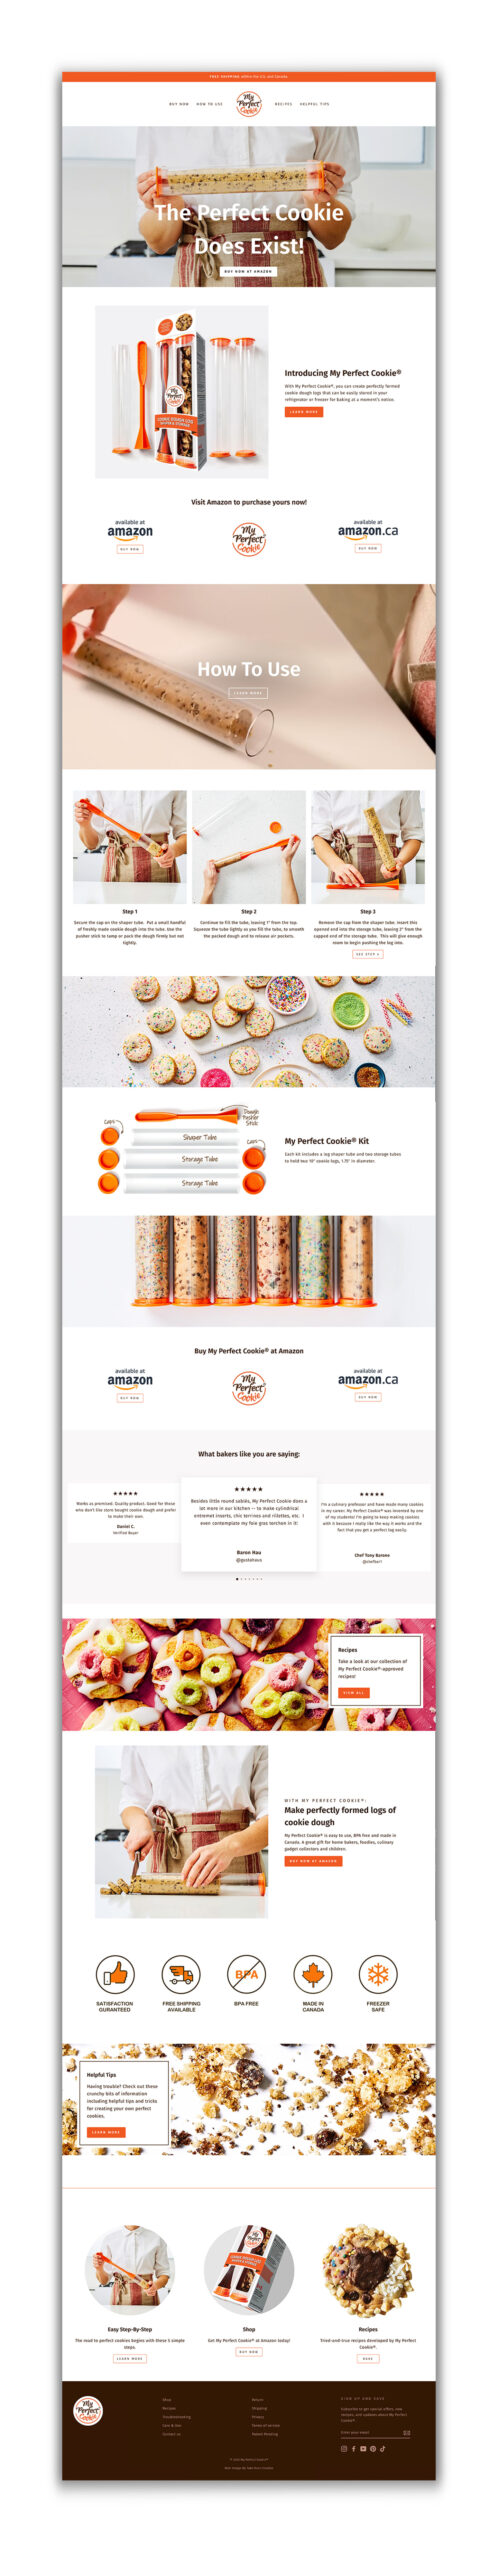 my-perfect-cookie-home-page-website-design